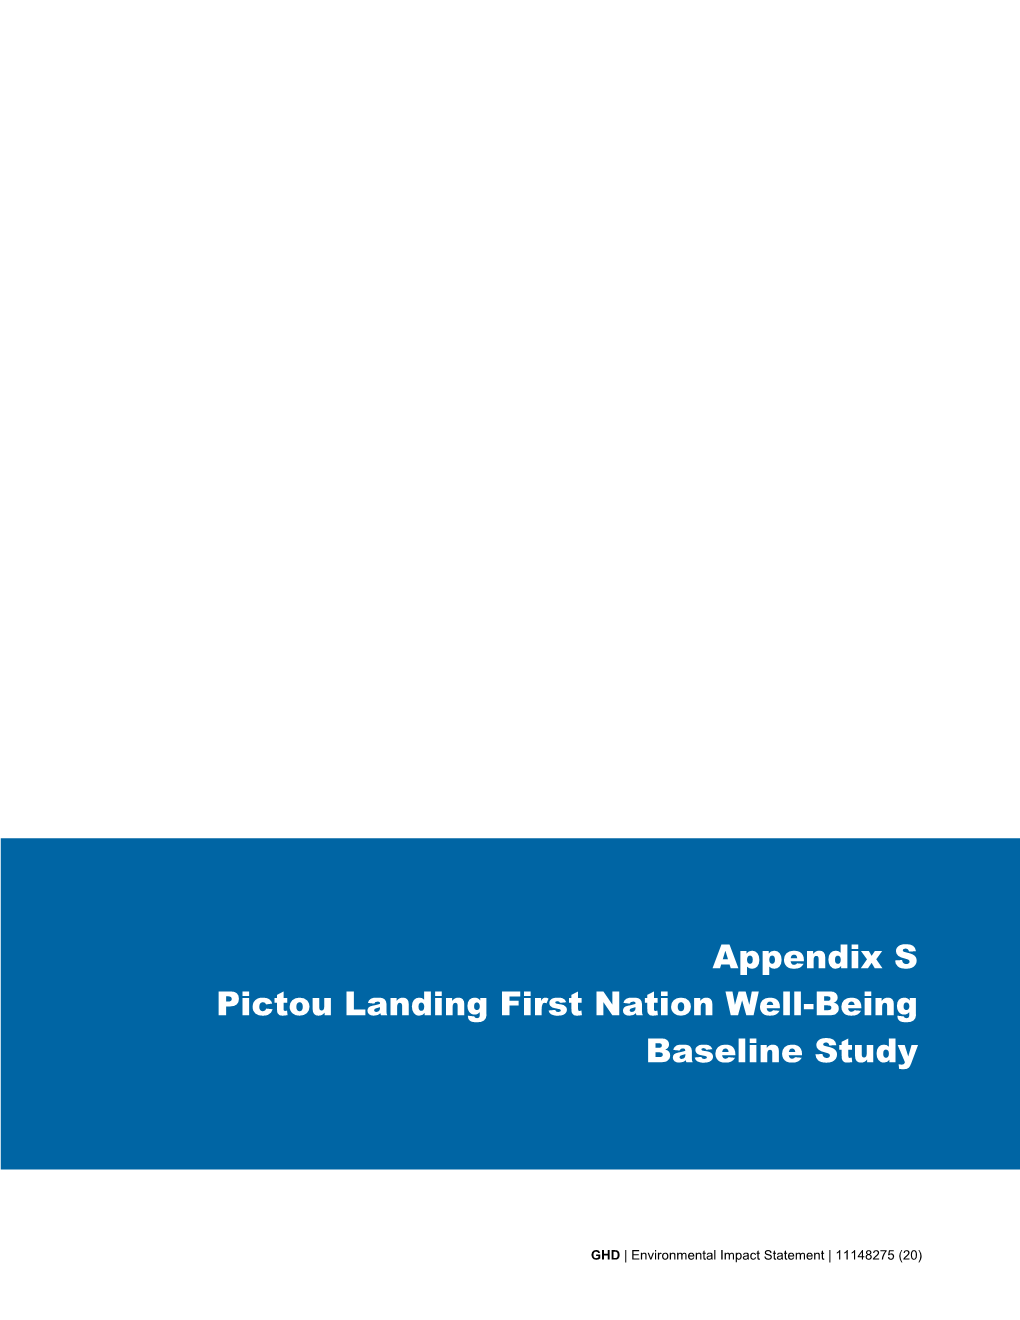 Appendix S Pictou Landing First Nation Well-Being Baseline Study